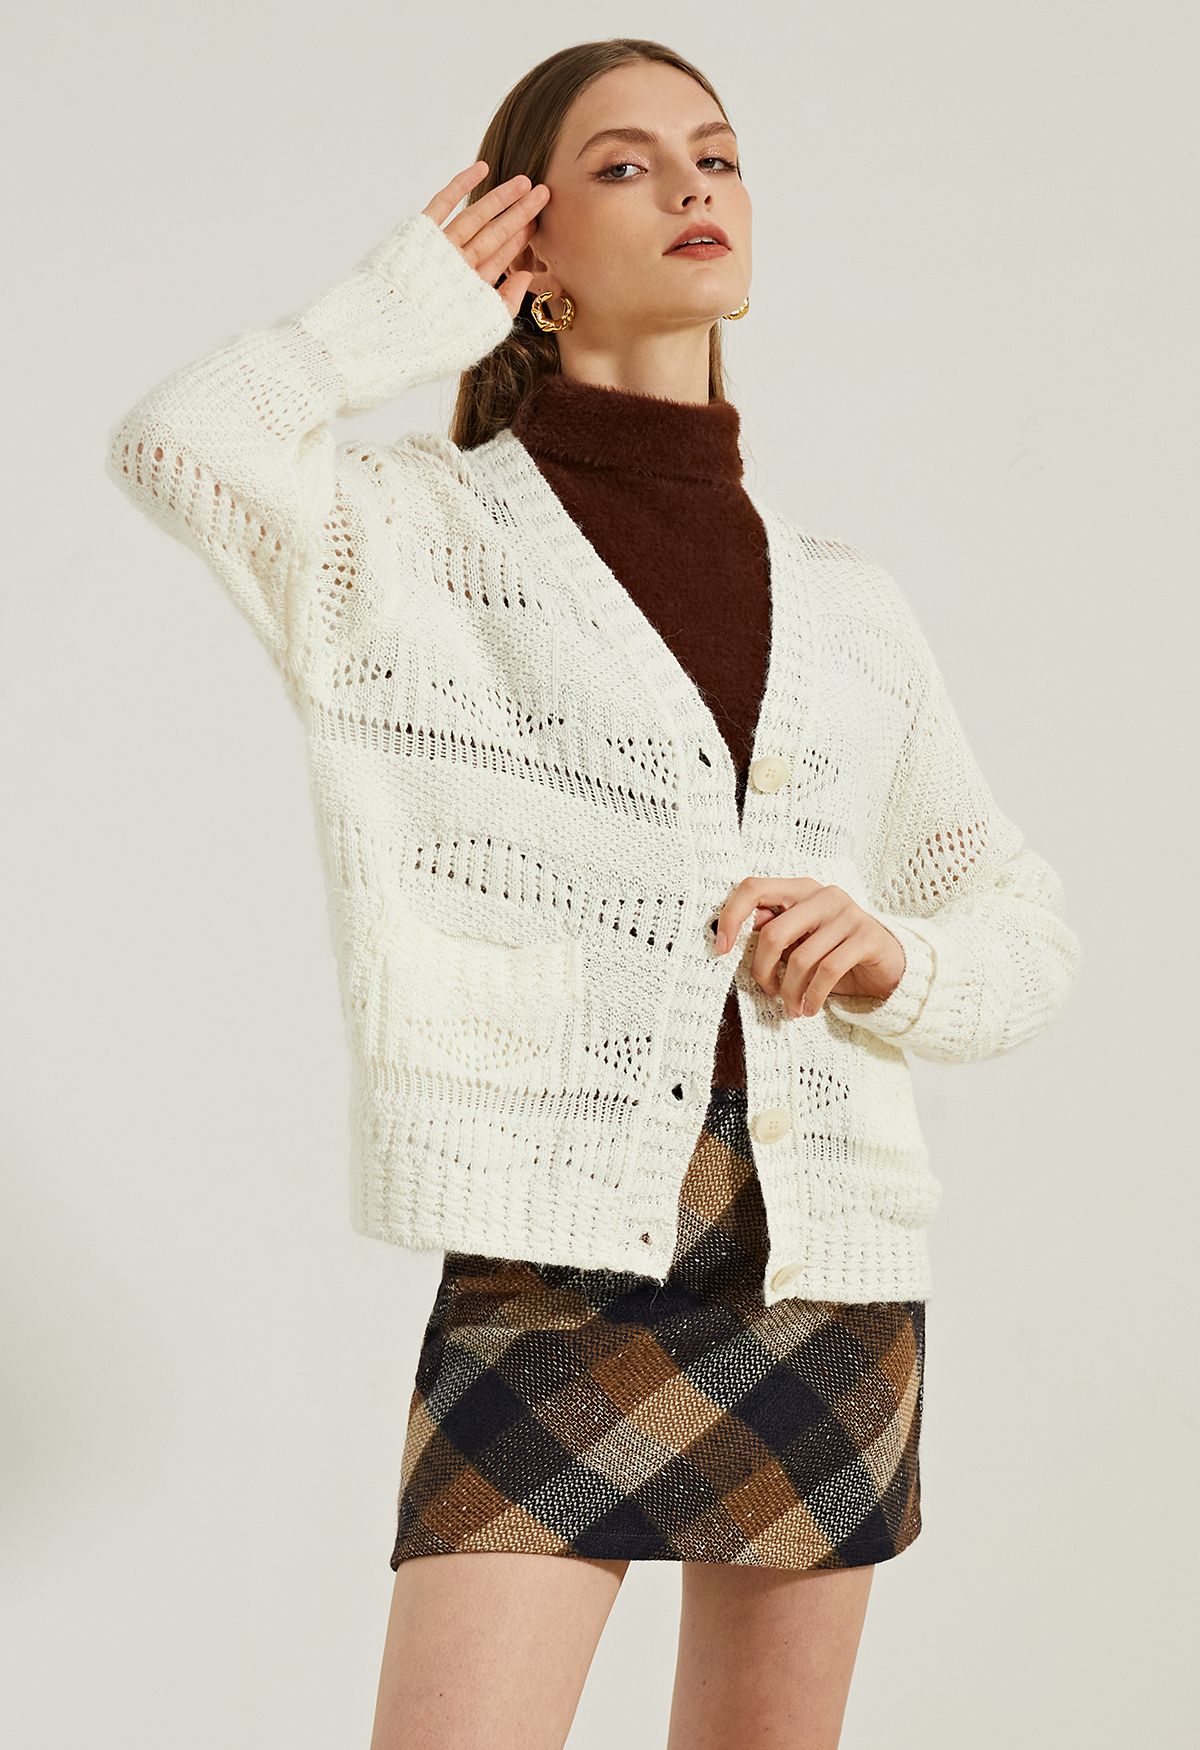 Button Down Openwork Knit Cardigan in Ivory